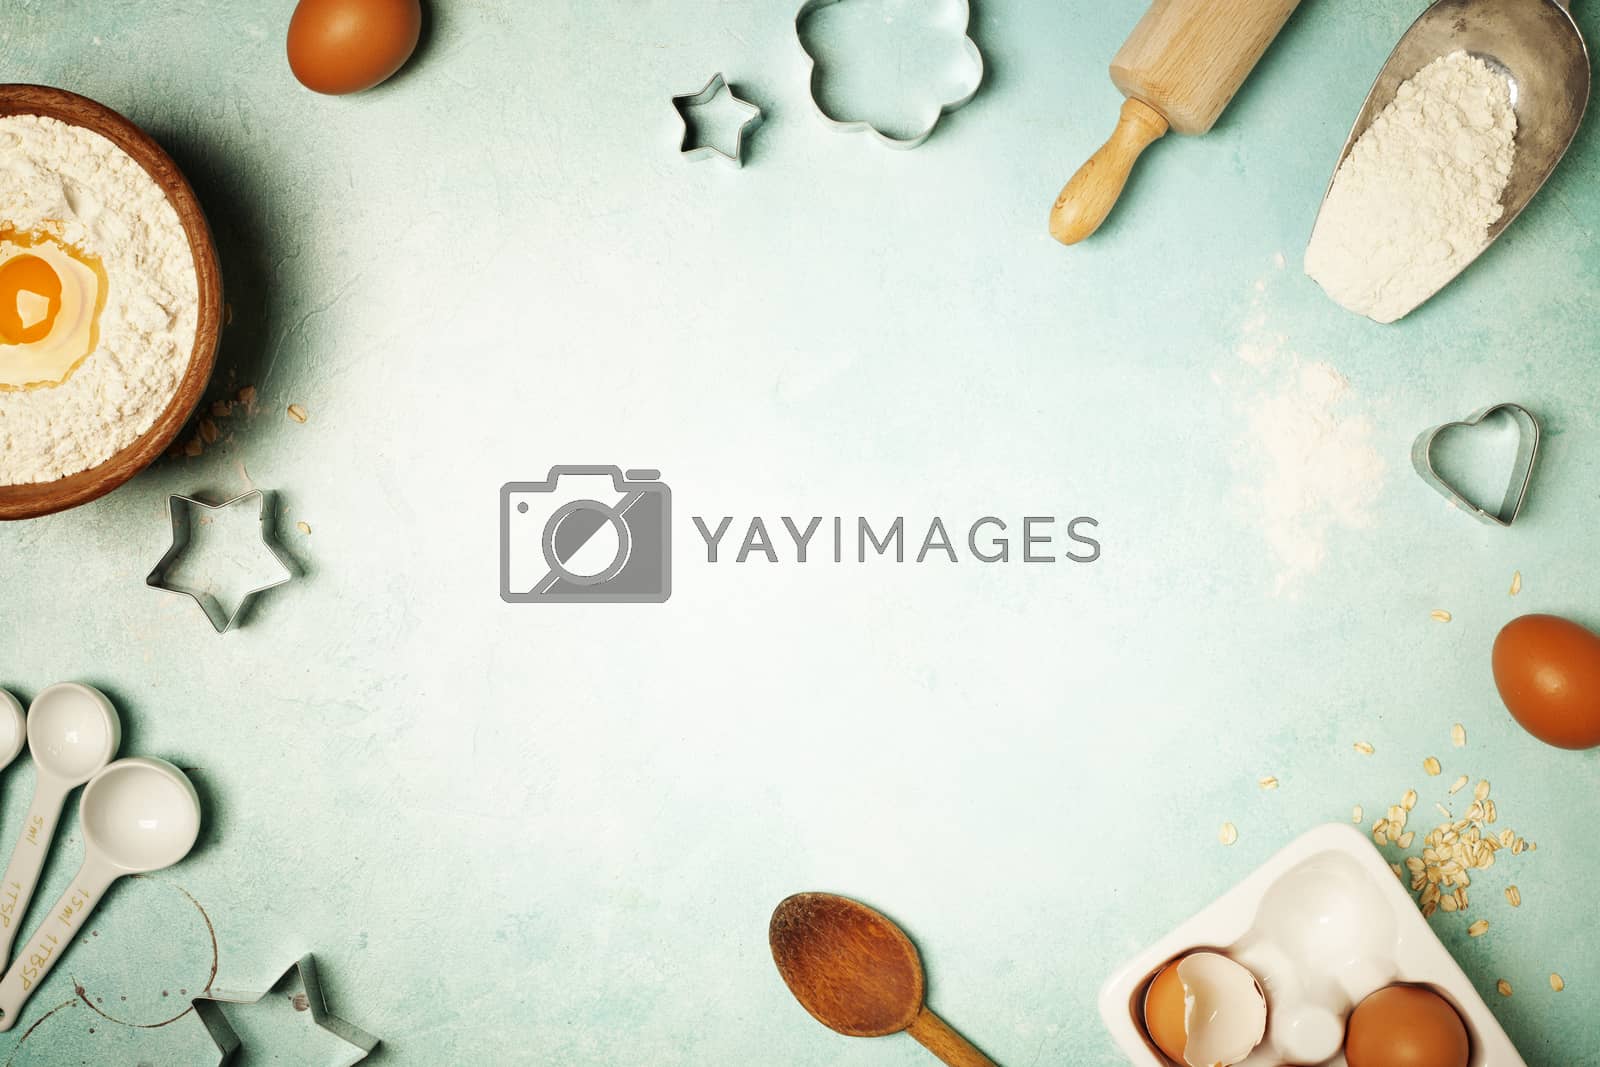 Baking background with flour, eggs and kitchen tools on blue rustic table. Top view. Flat lay style.